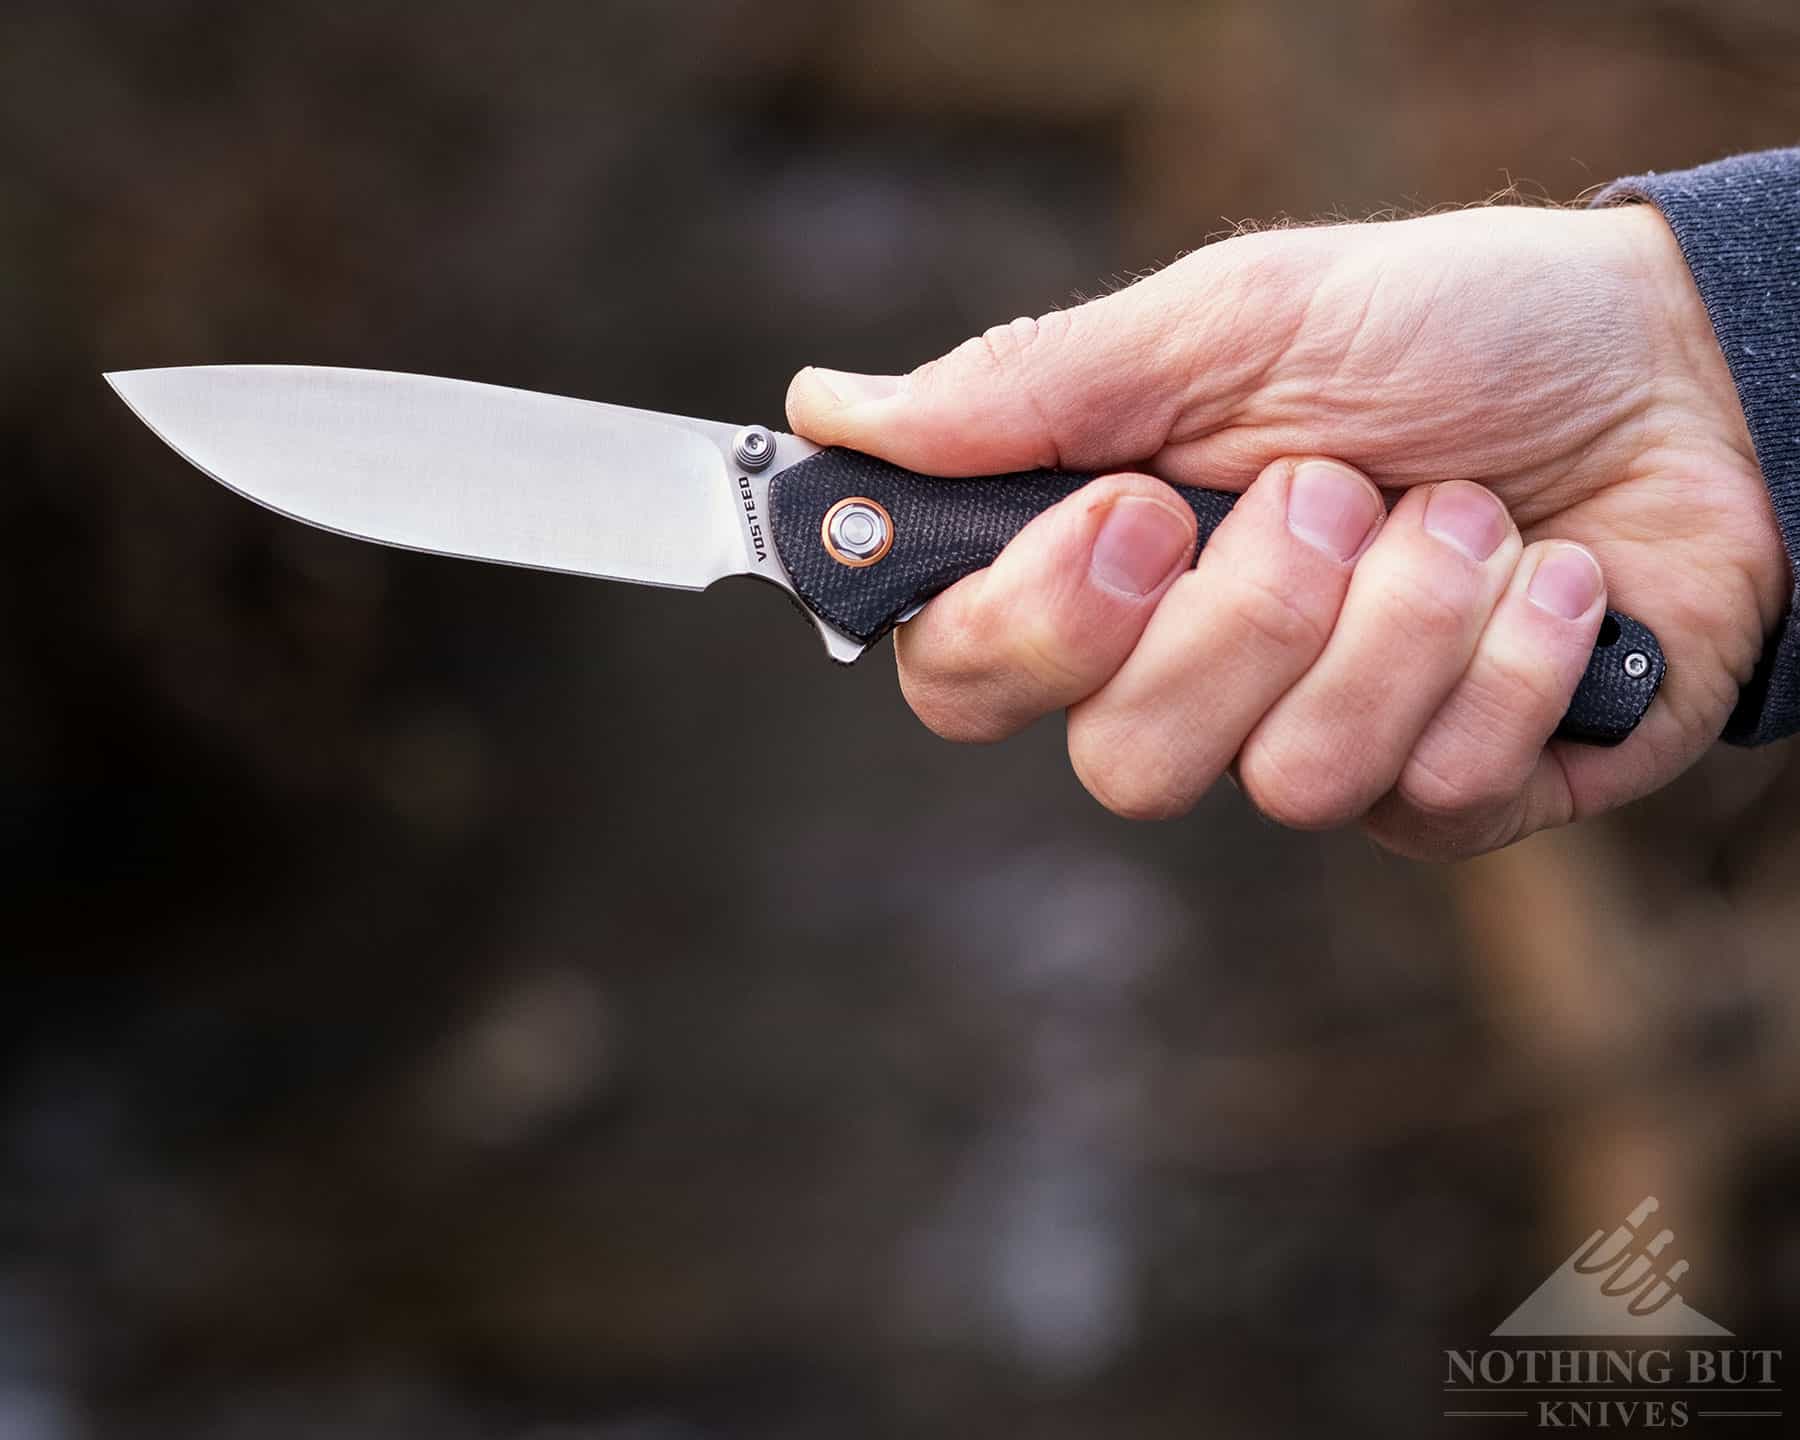 The jimping on the Labrador's flipper tab make the knife easy to open easy to open and it serves as traction for the thumb when gripping the knife.